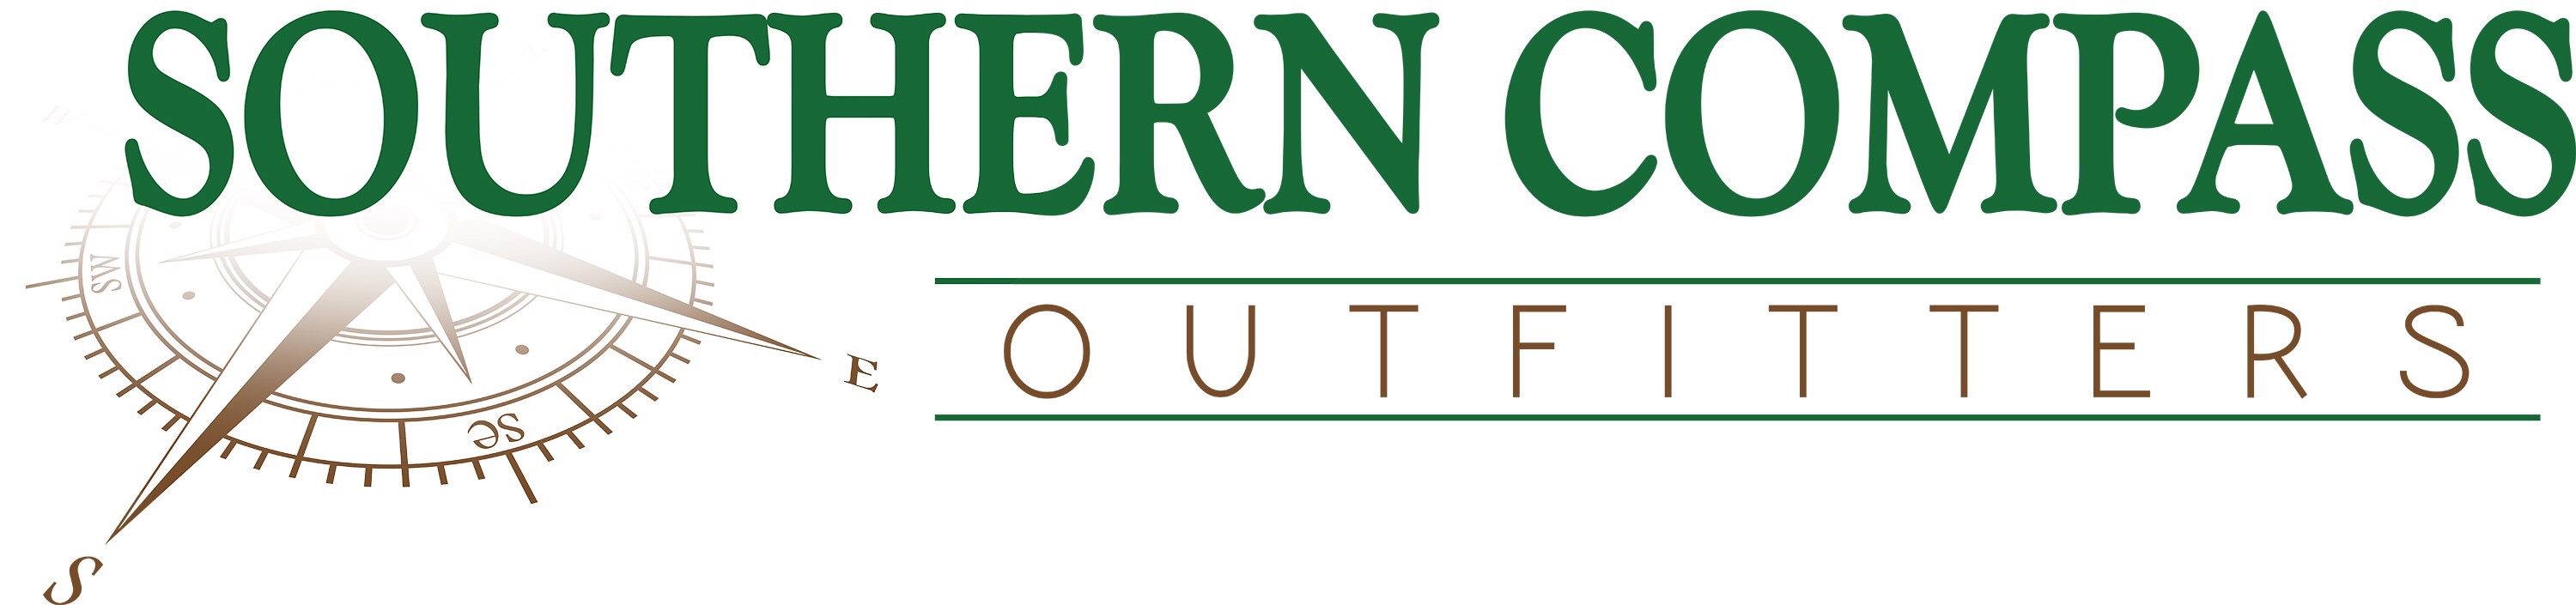 Southern Compass Outfitters